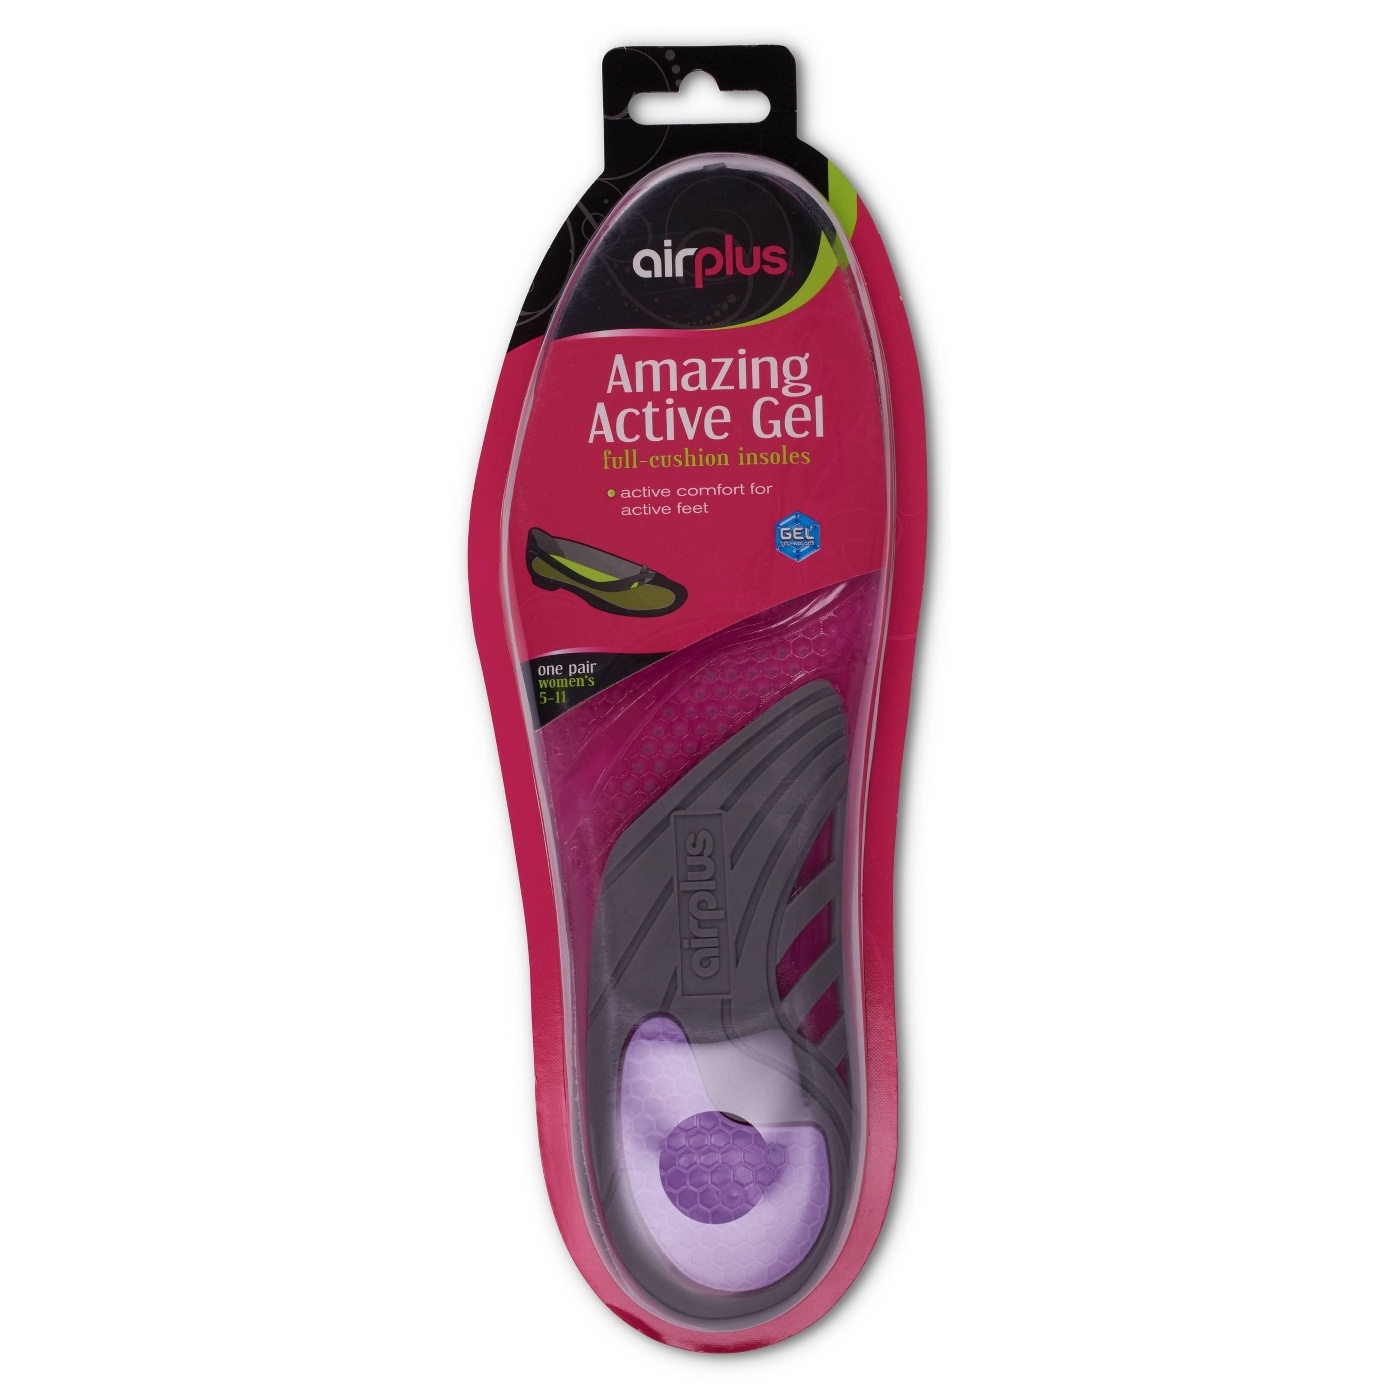 slide 1 of 1, Airplus Amazing Active Gel Full-Cushion Insoles, Womens 5-11, 1 ct